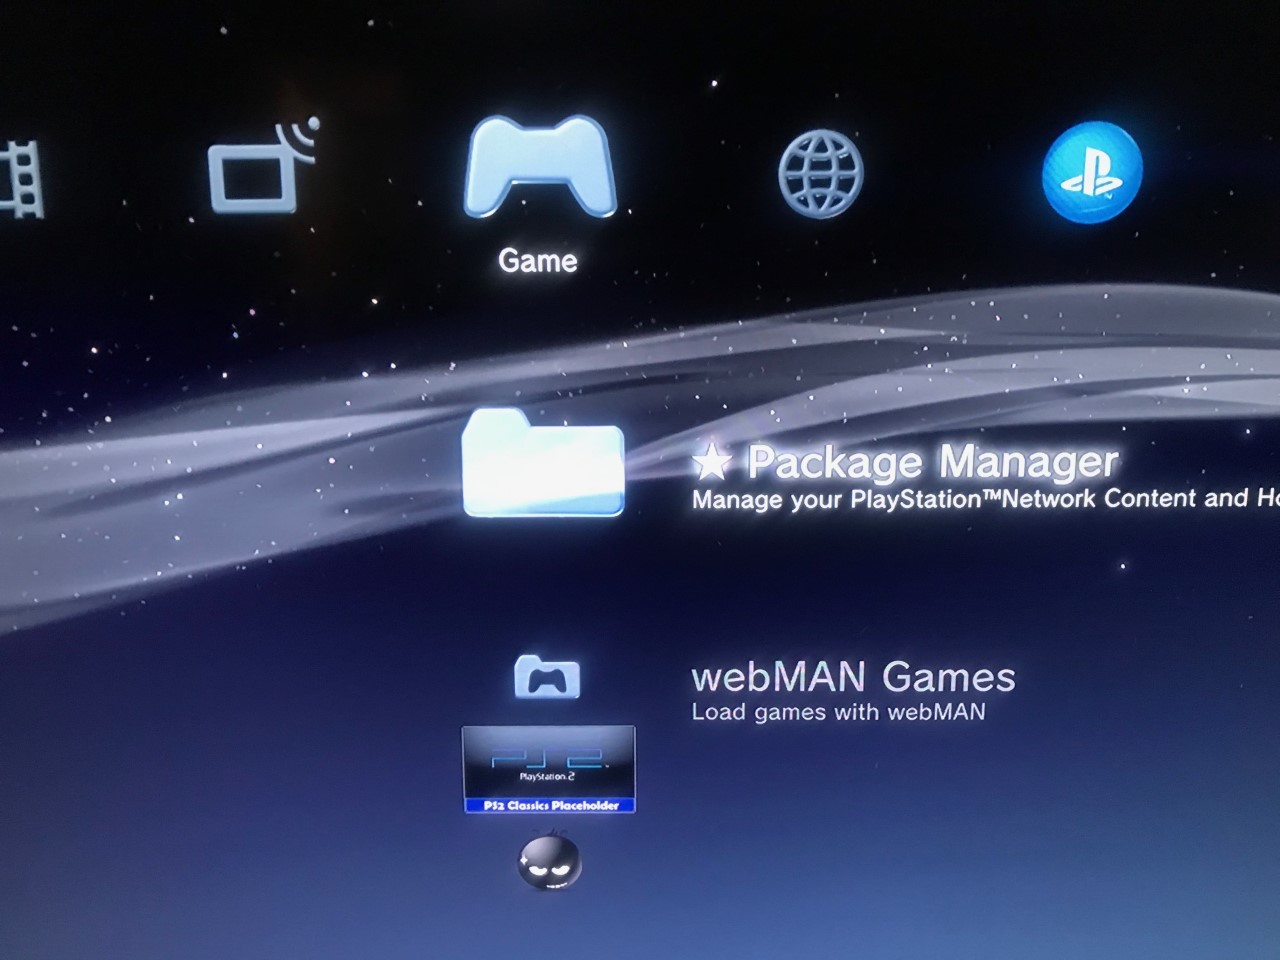 Manager ps3. Package Manager ps3.